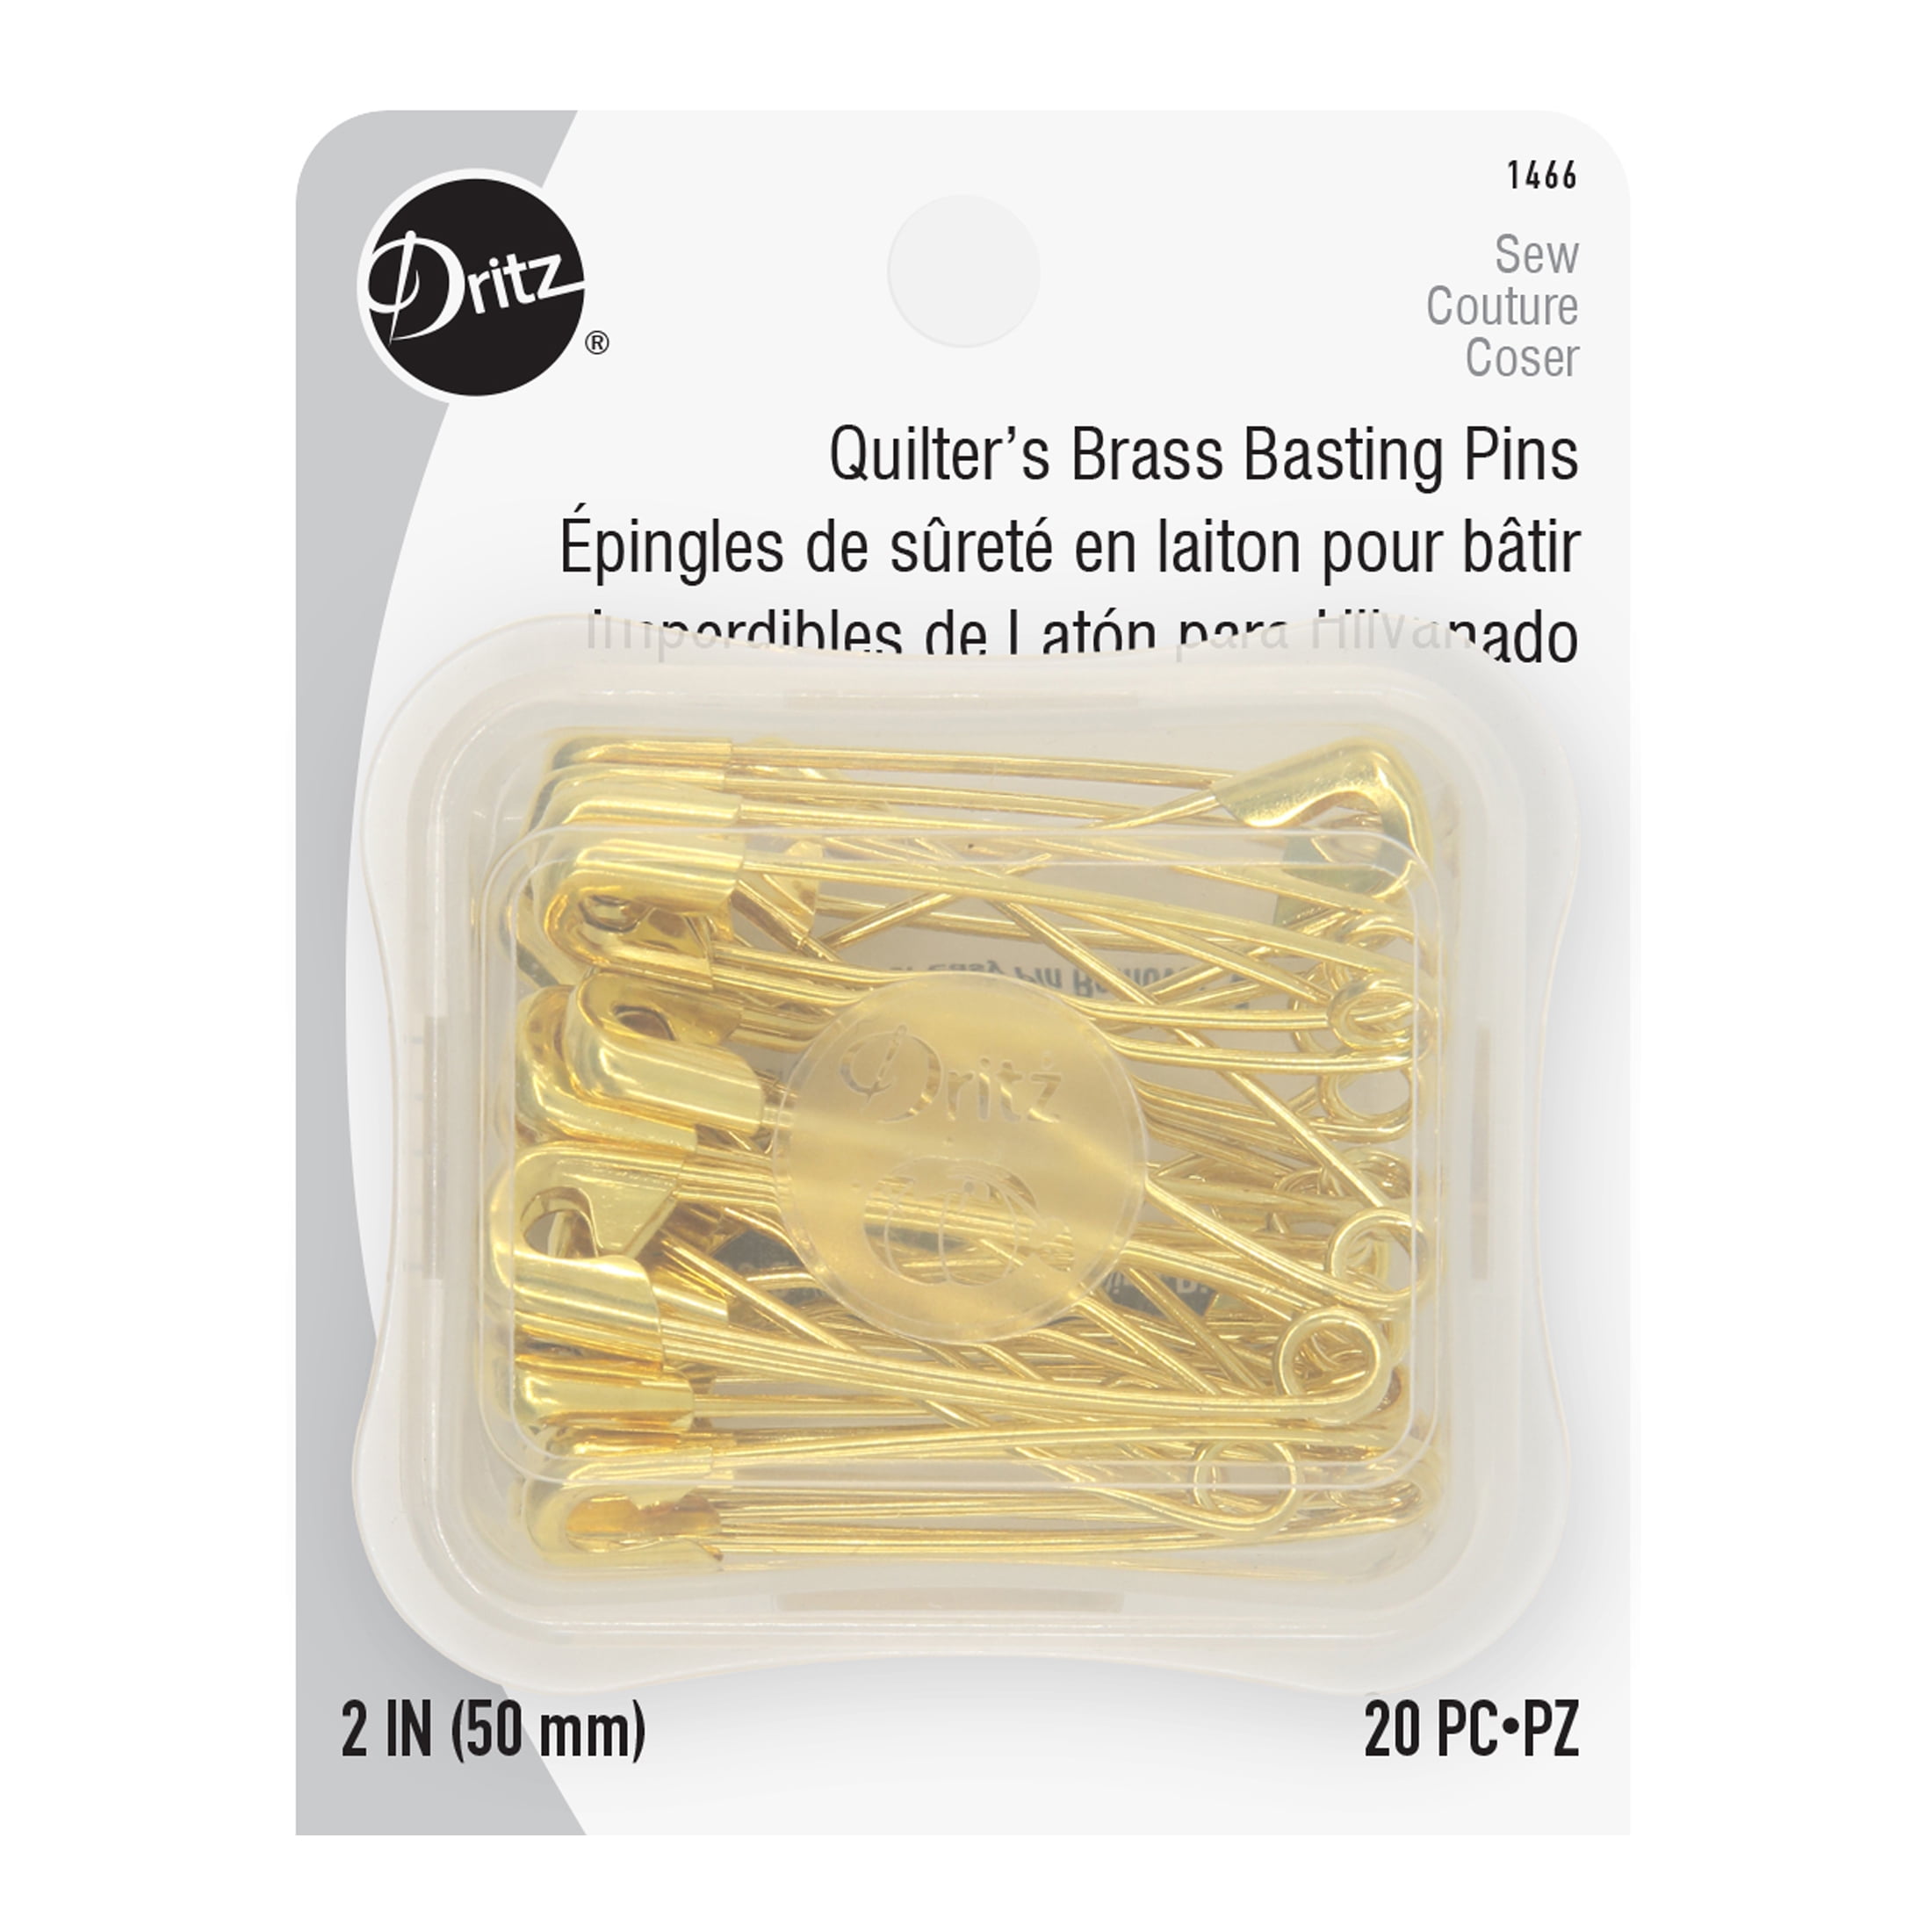 Dritz 131 Quilting Pins, Yellow, 1-3/4-Inch (175-Count)